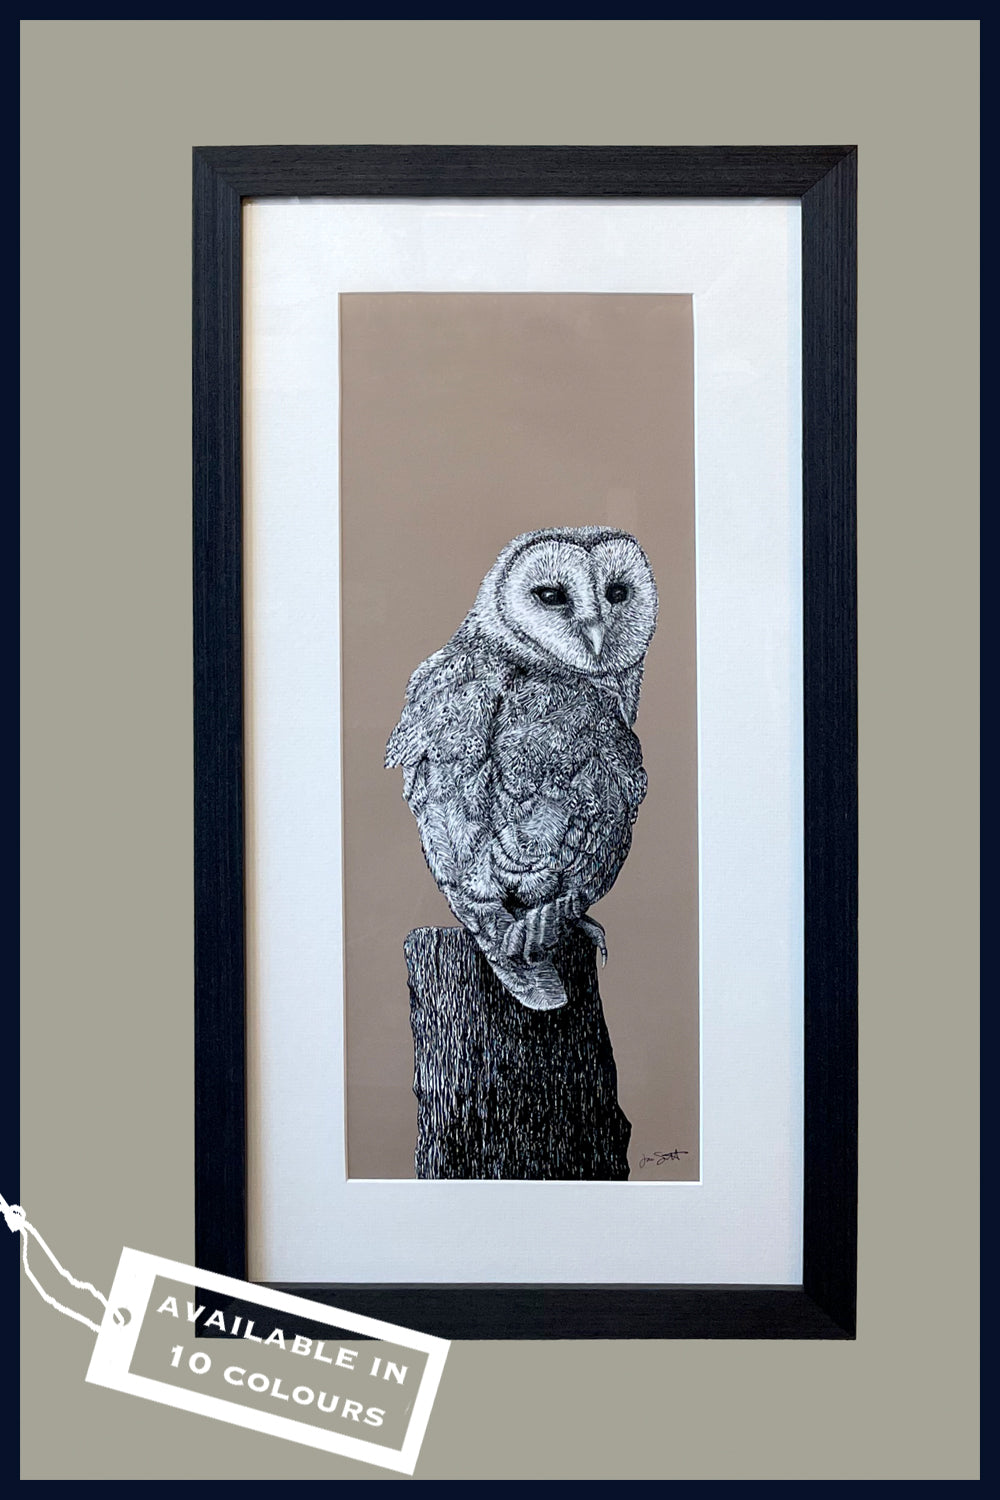 Framed Behind You: Aviary Collection Fine Art Print - available in 10 colours